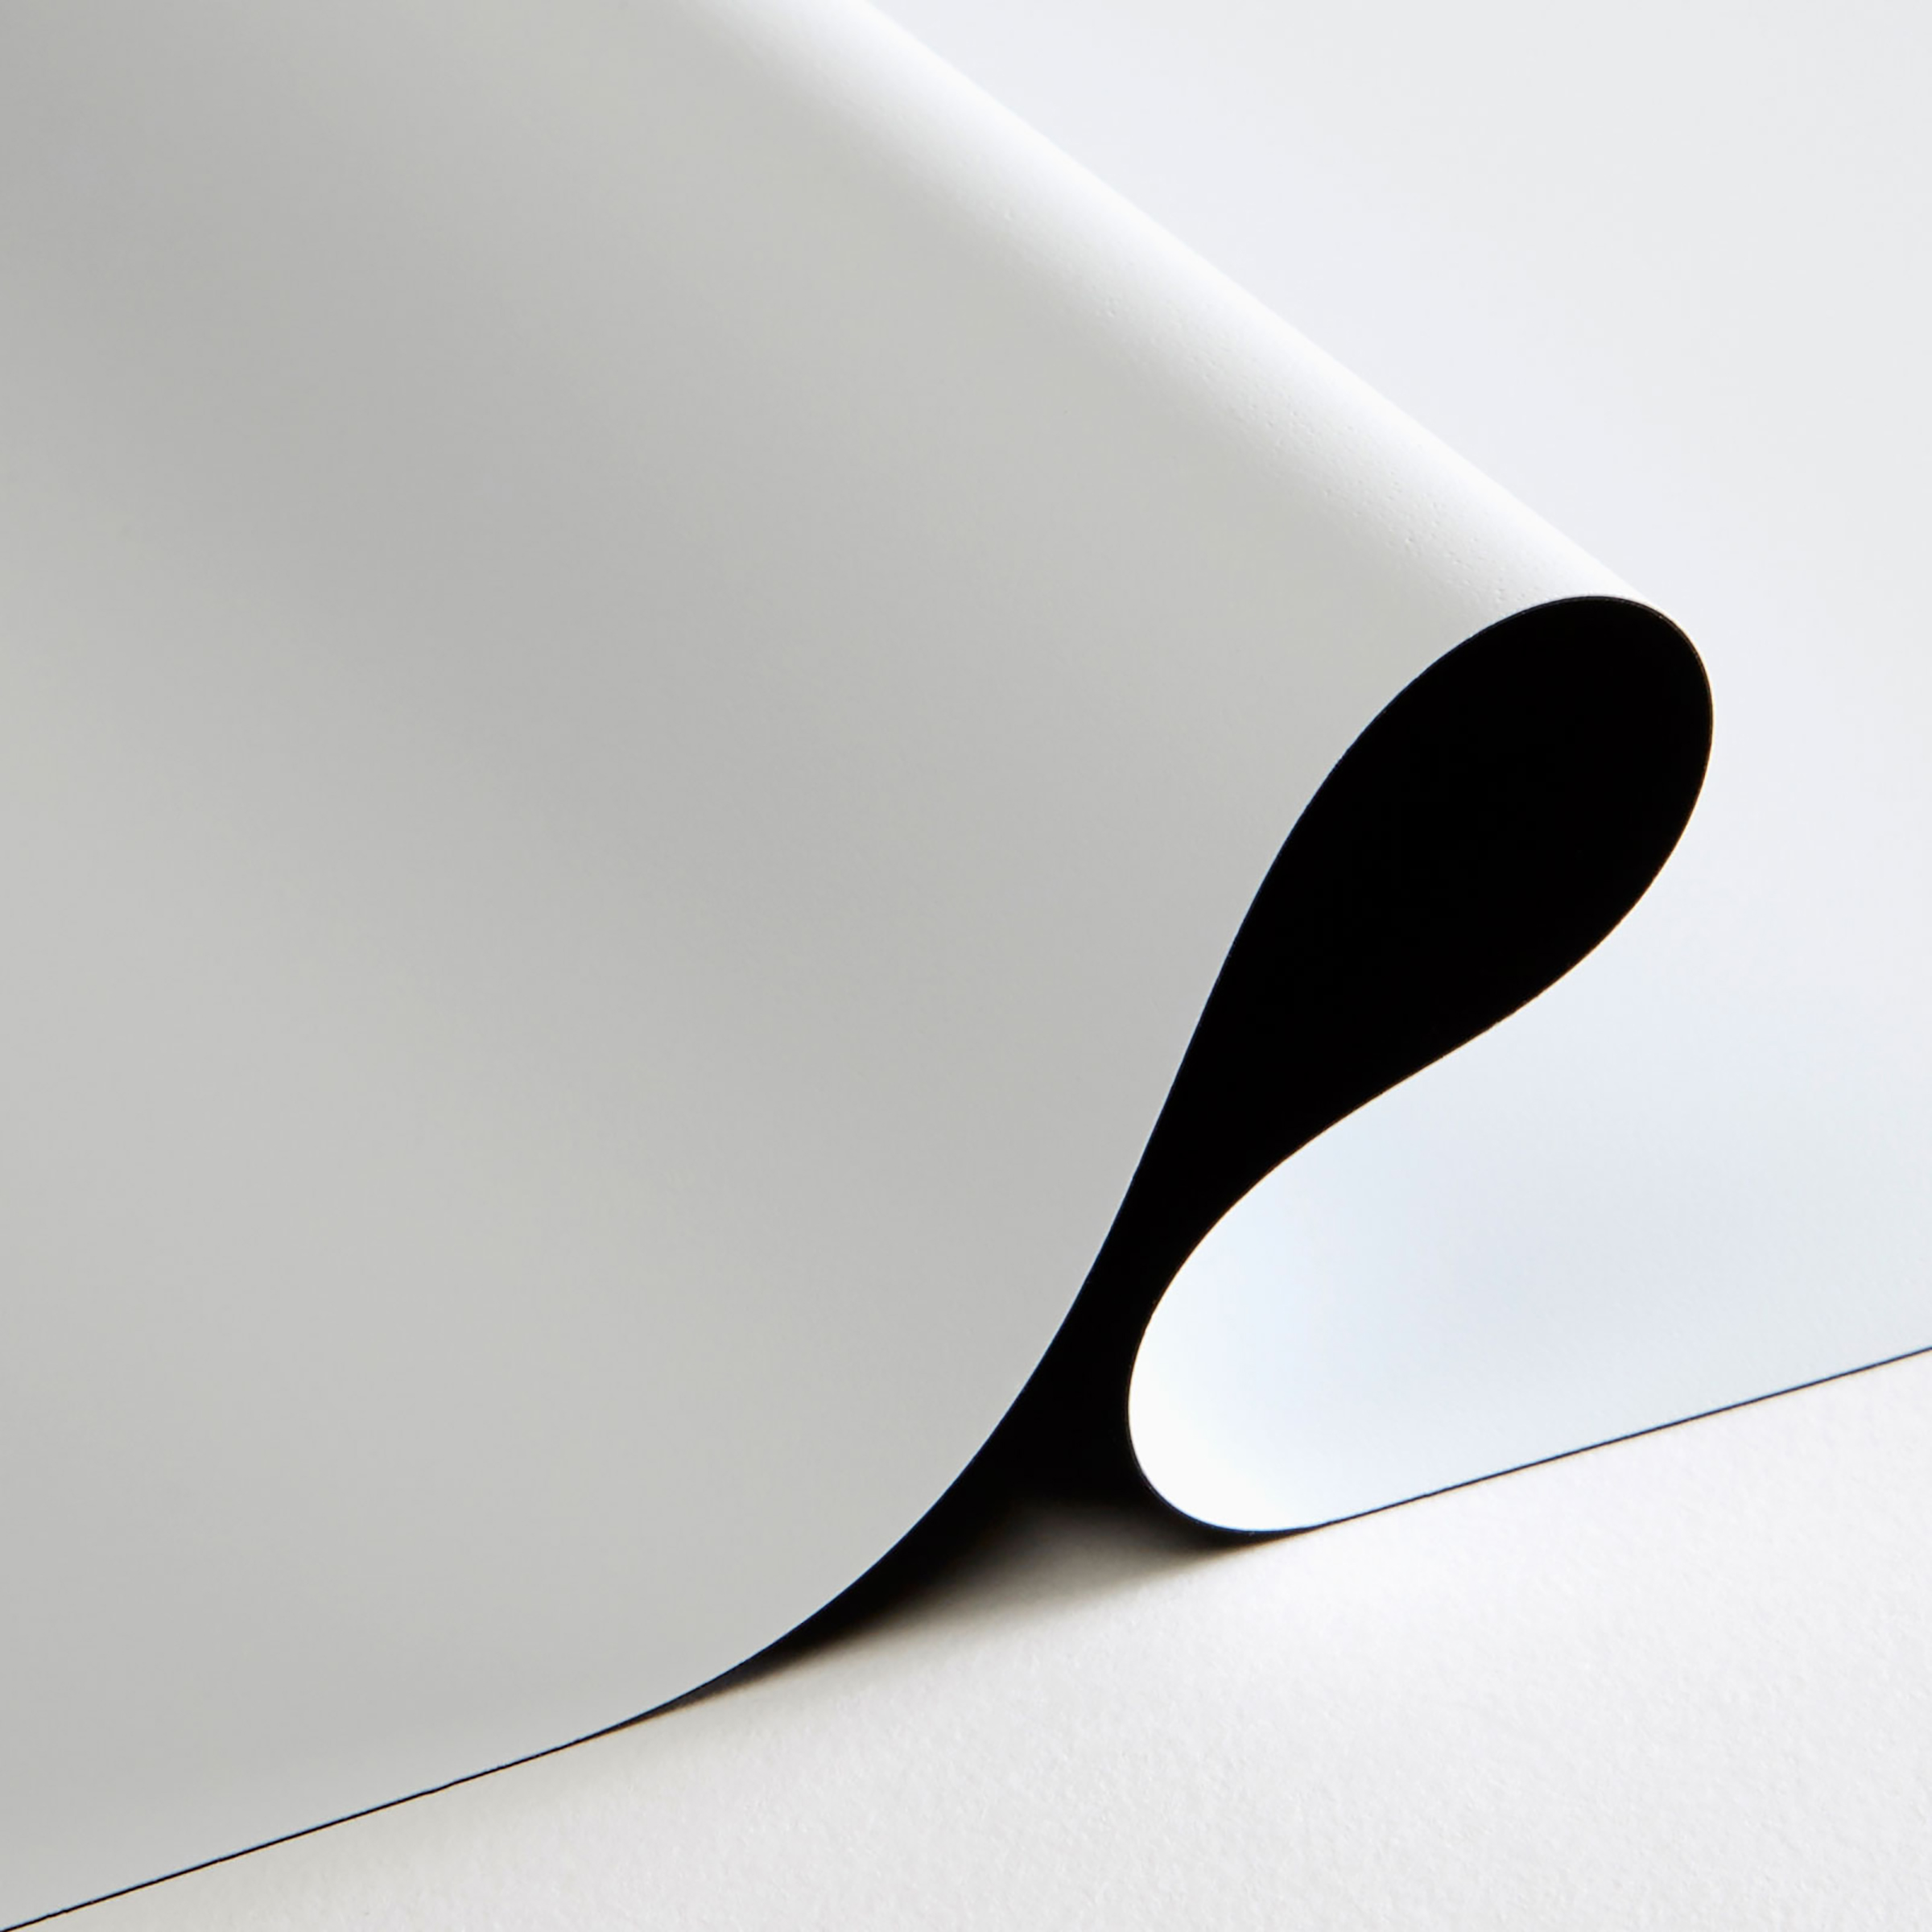 FlexiWhite Projector Screen Material